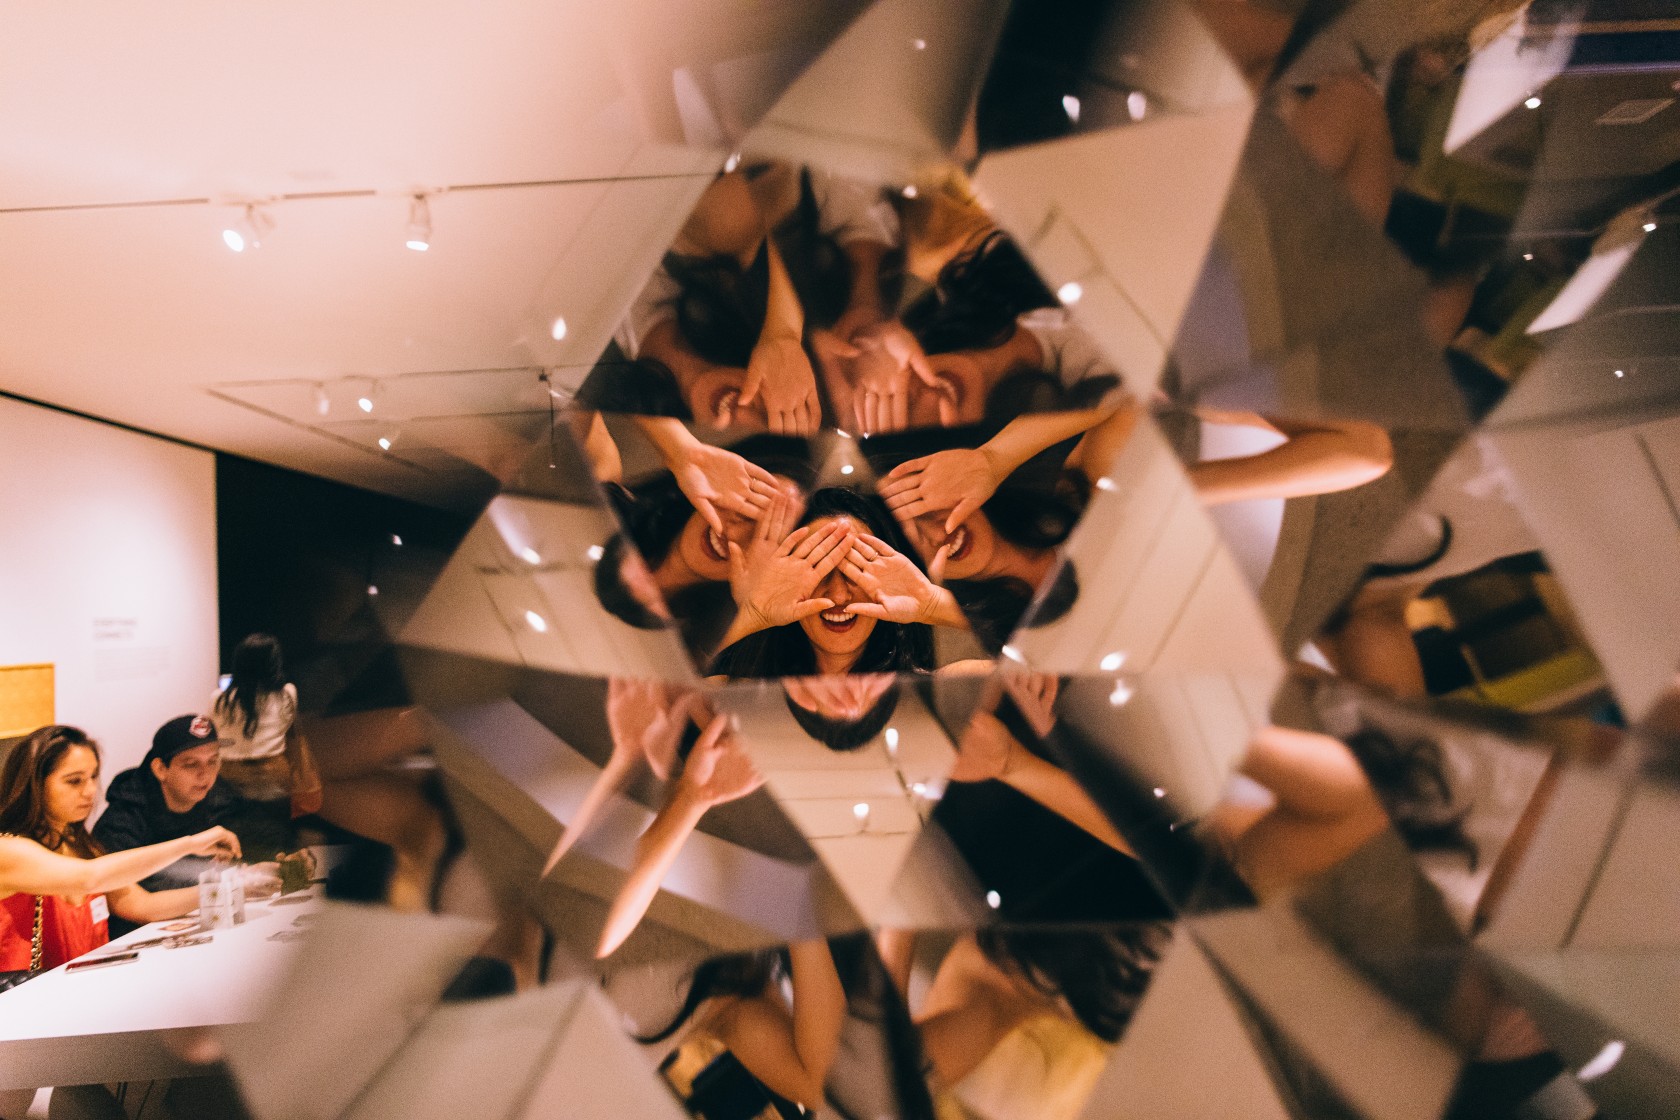 Erin Fong in one of the many kaleidoscopes. (Sothear Nuon)